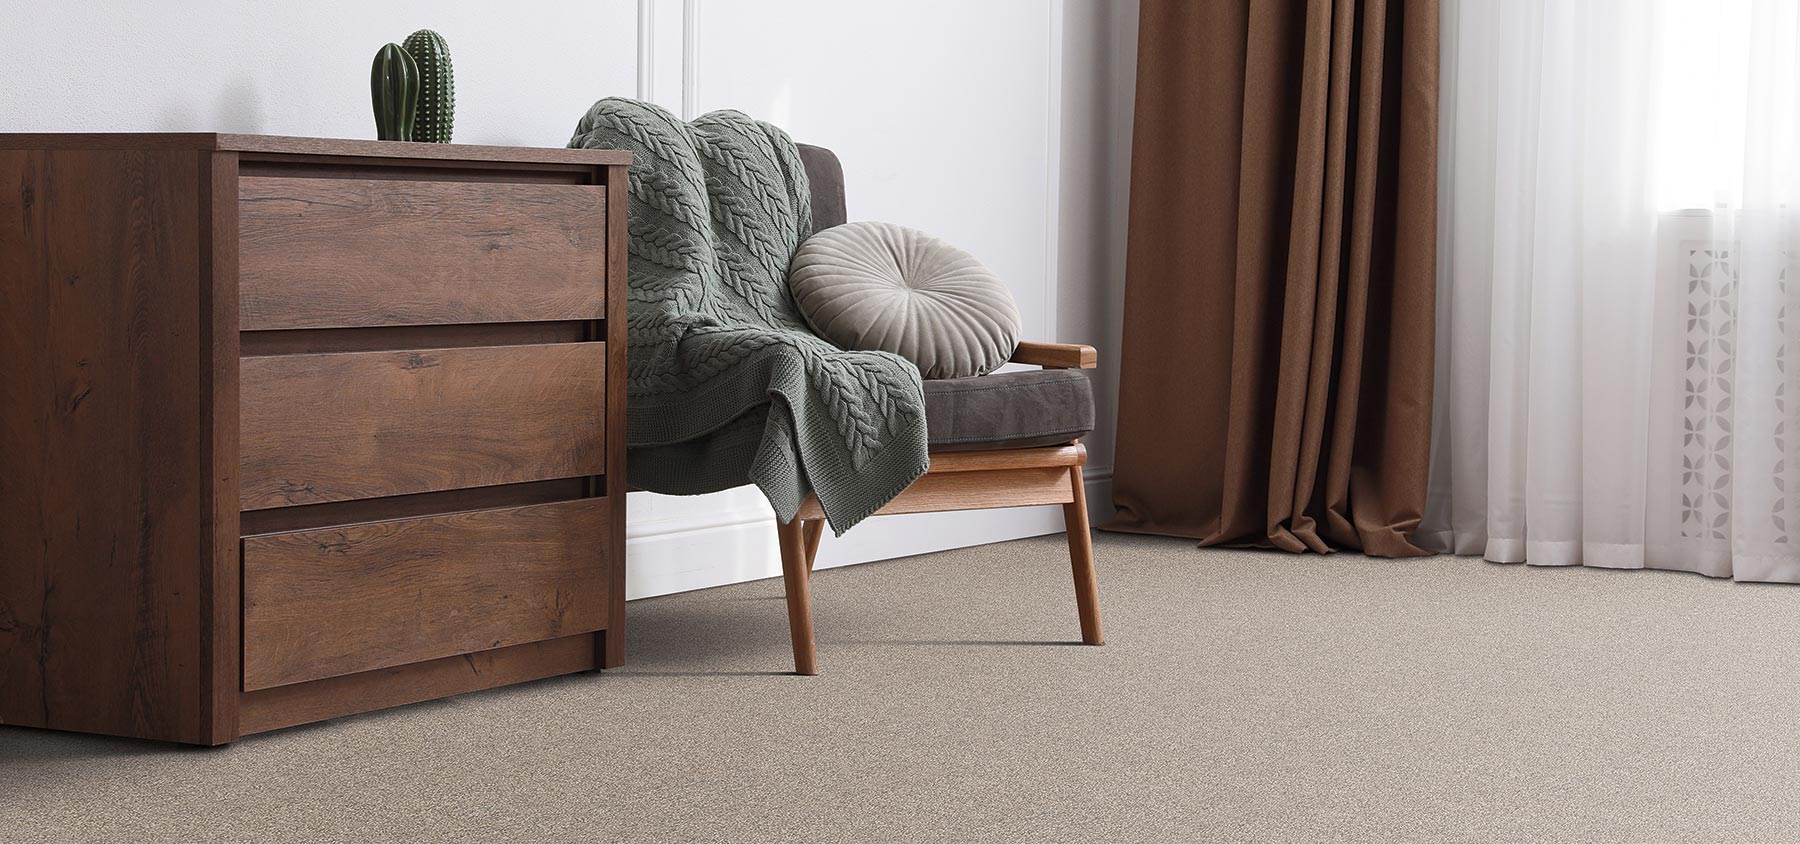 chair and nightstand in bedroom with carpet flooring